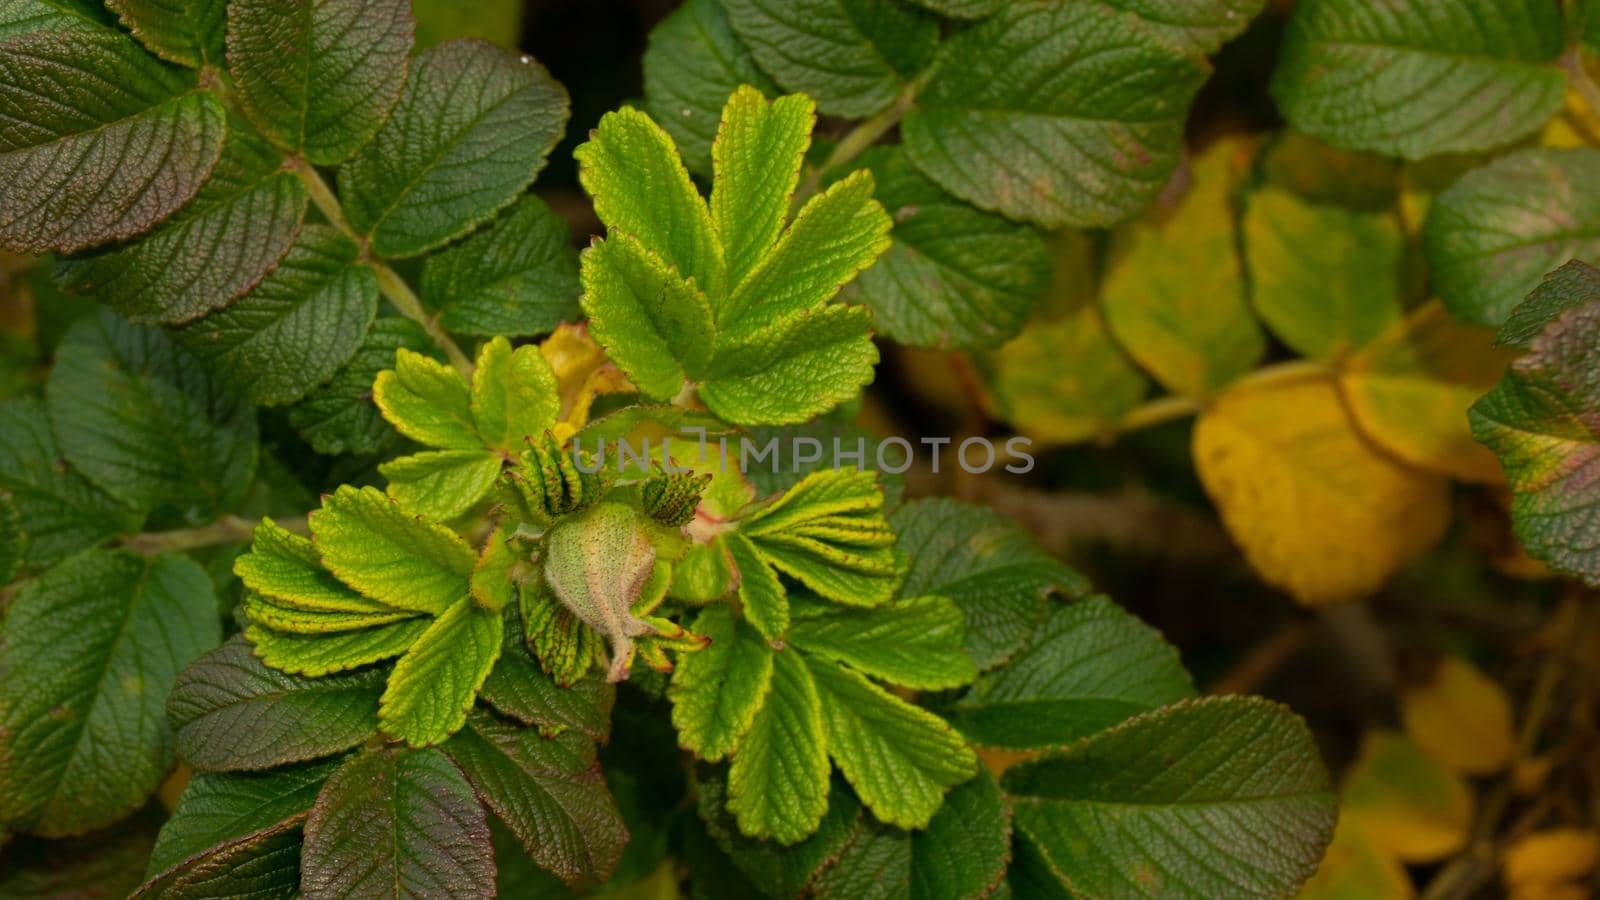 A green shoot of canker-rose briar with a closed flower bud against a background of wild rose leaves